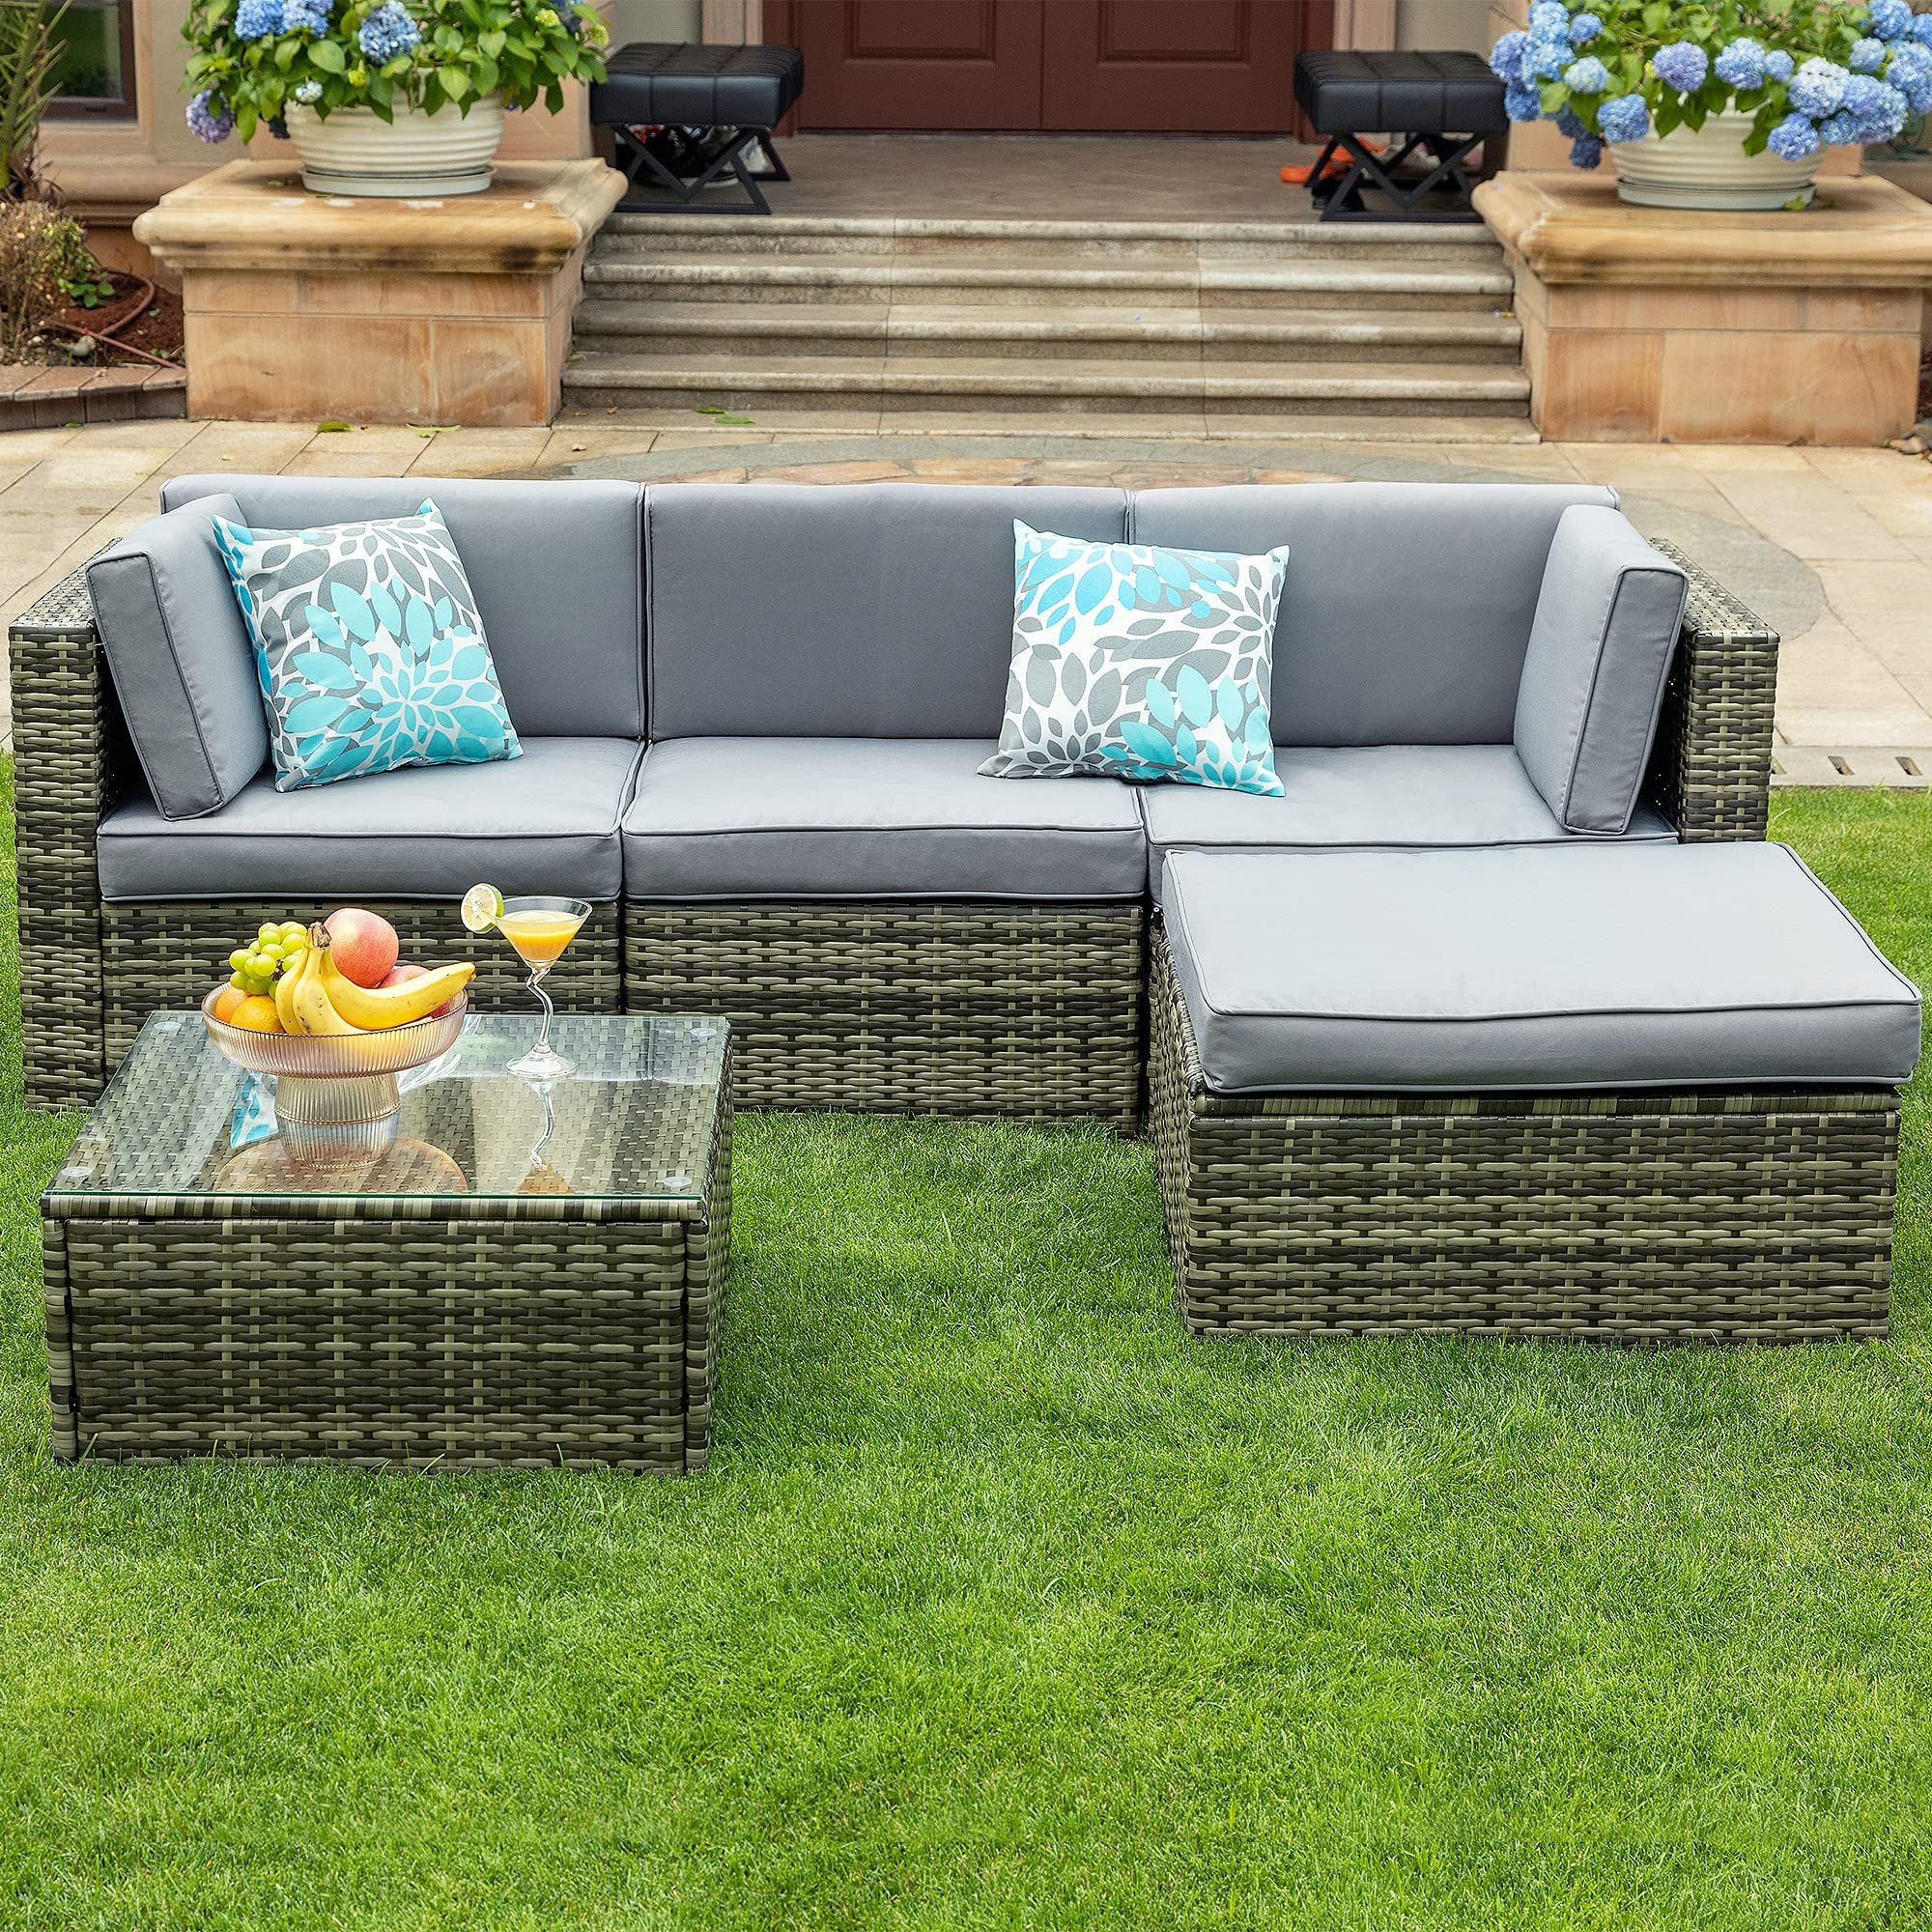 5 Piece Outdoor Patio Furniture Set Regarding Most Recently Released Amazon: Yitahome 5 Piece Outdoor Patio Furniture Sets, All Weather  Wicker Sectional Sofa Patio Conversation Set With Ottoman, Coffee Table And  Cushions, Gray Gradient : Patio, Lawn & Garden (Photo 12 of 15)